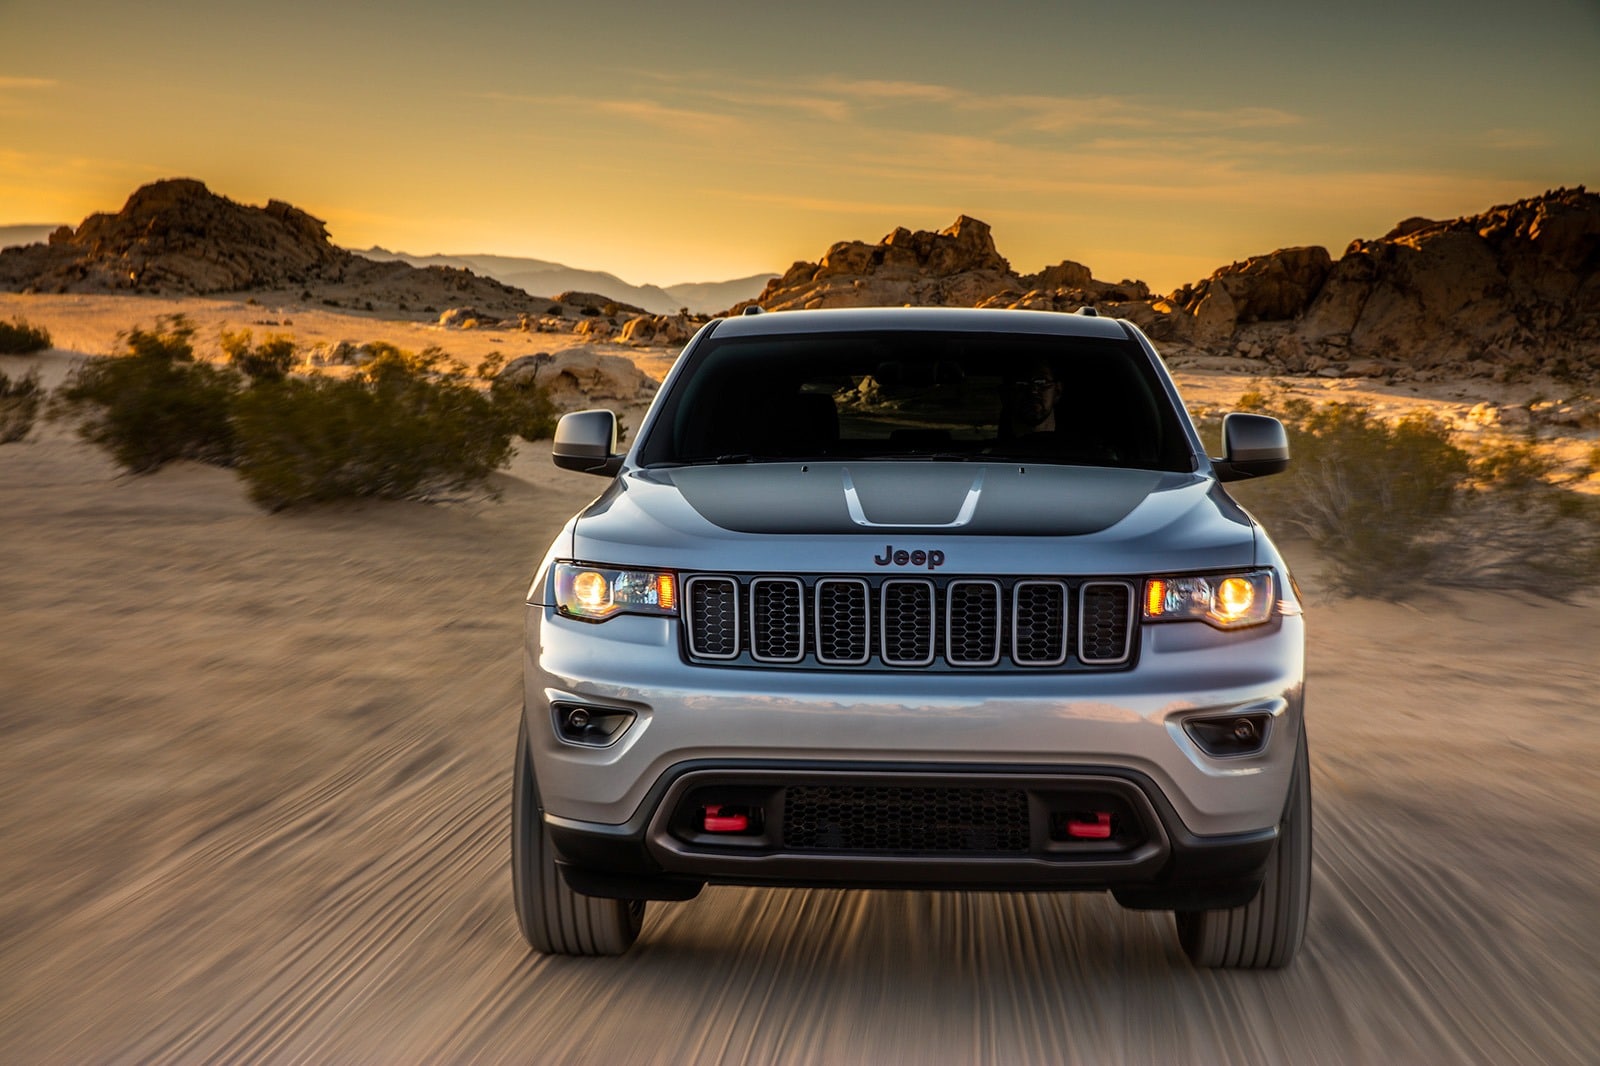 2017 Jeep Grand Cherokee Trailhawk Debuts at 2016 New York Auto Show